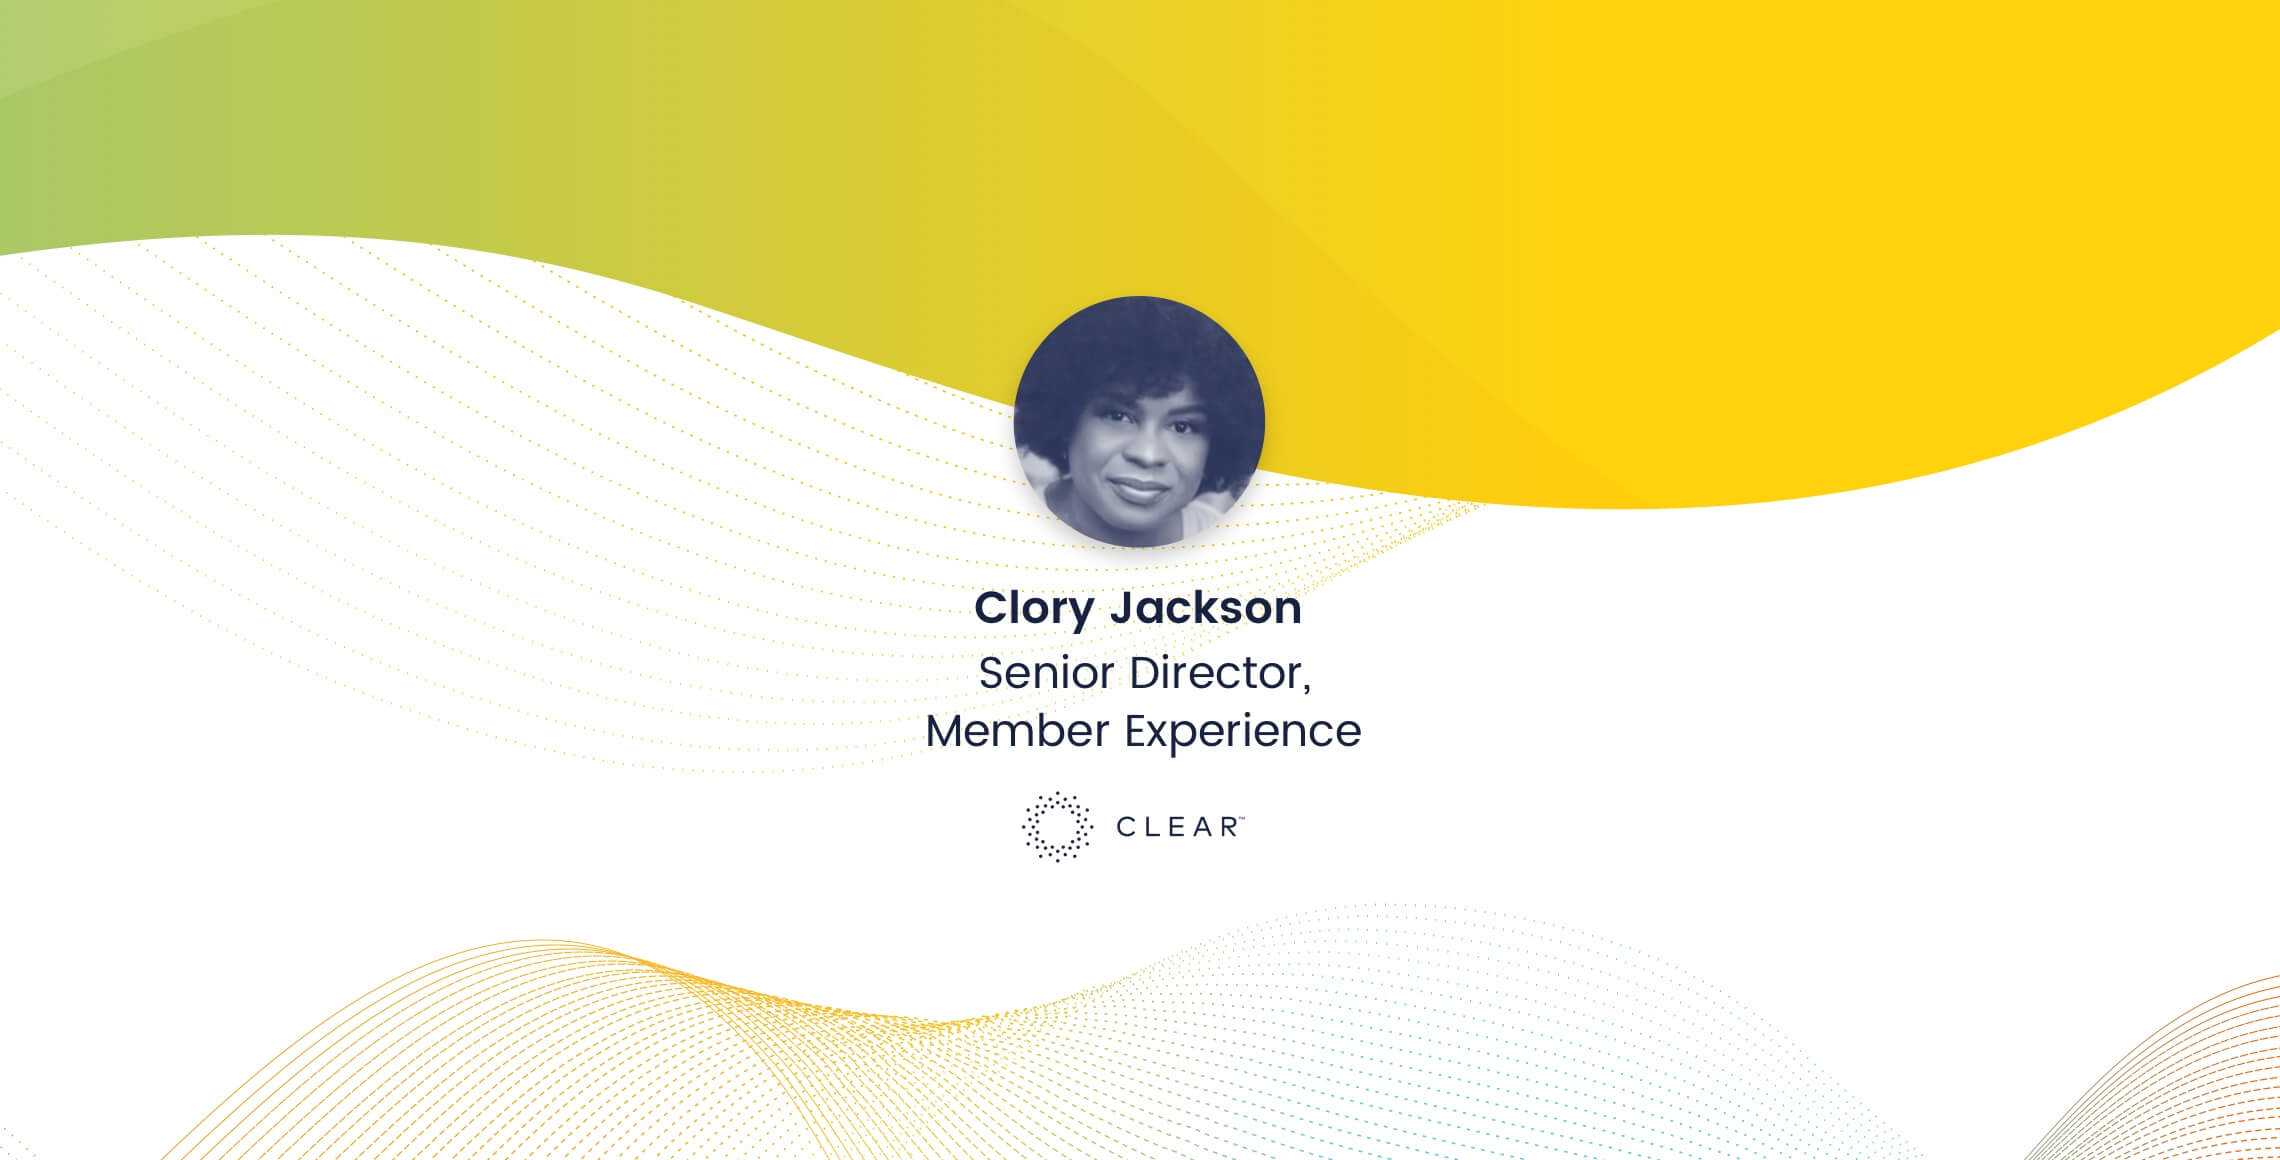 Clory Jackson, Senior Director of Member Experience, Clear